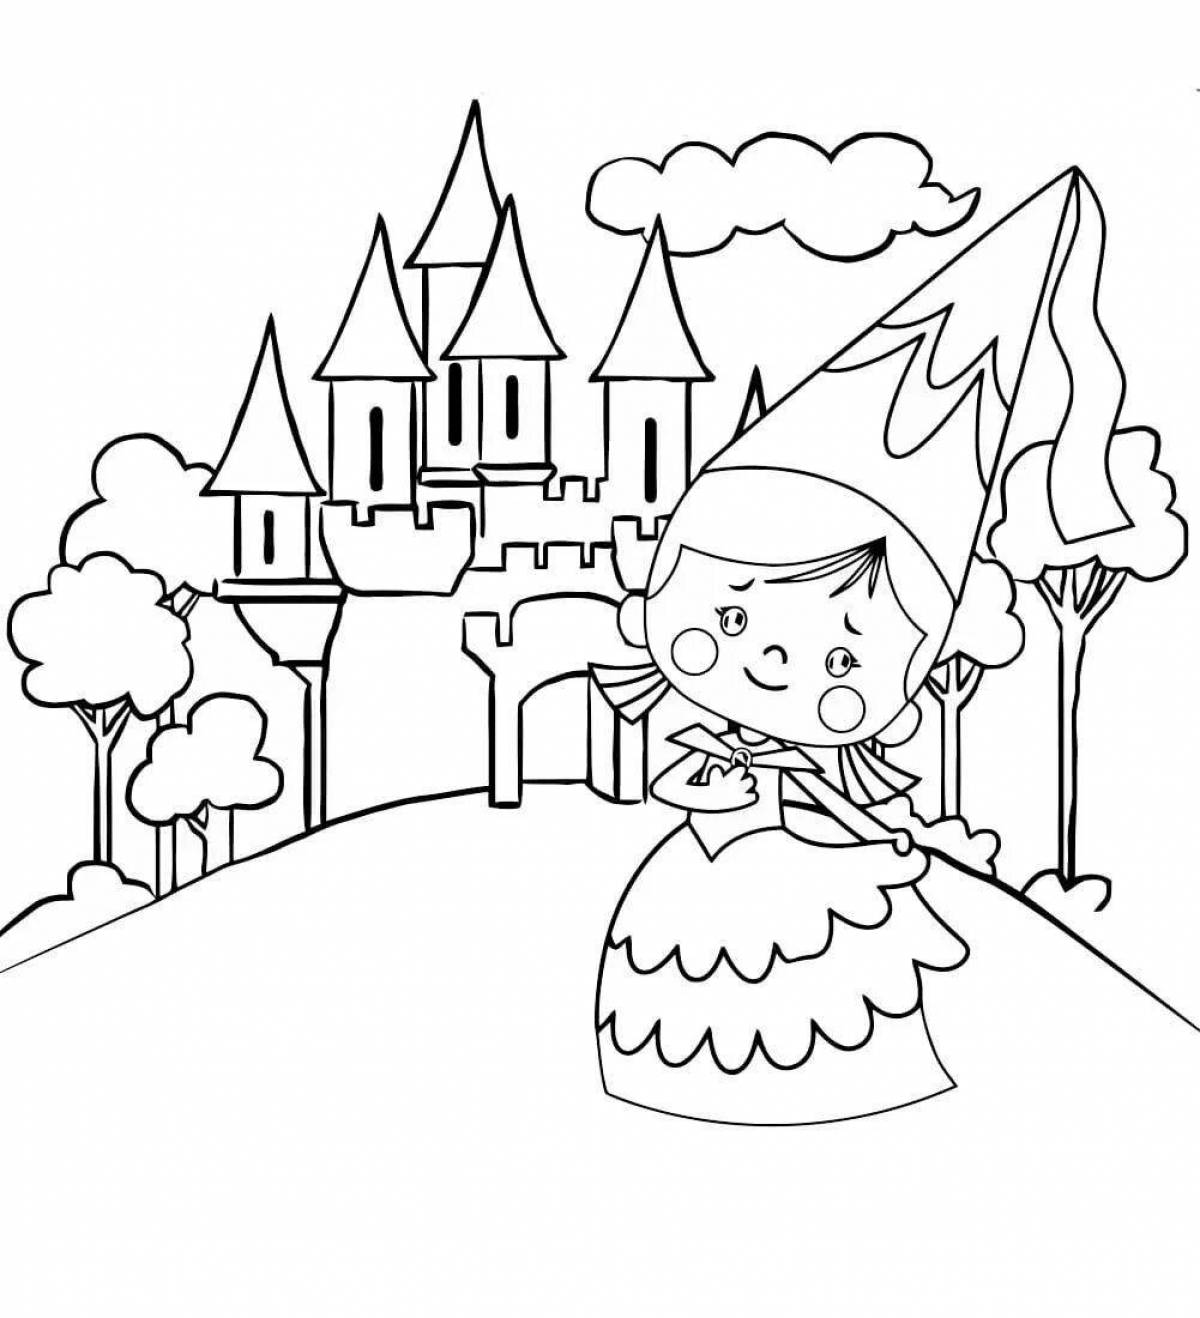 Rampant Castle Coloring Page for Girls